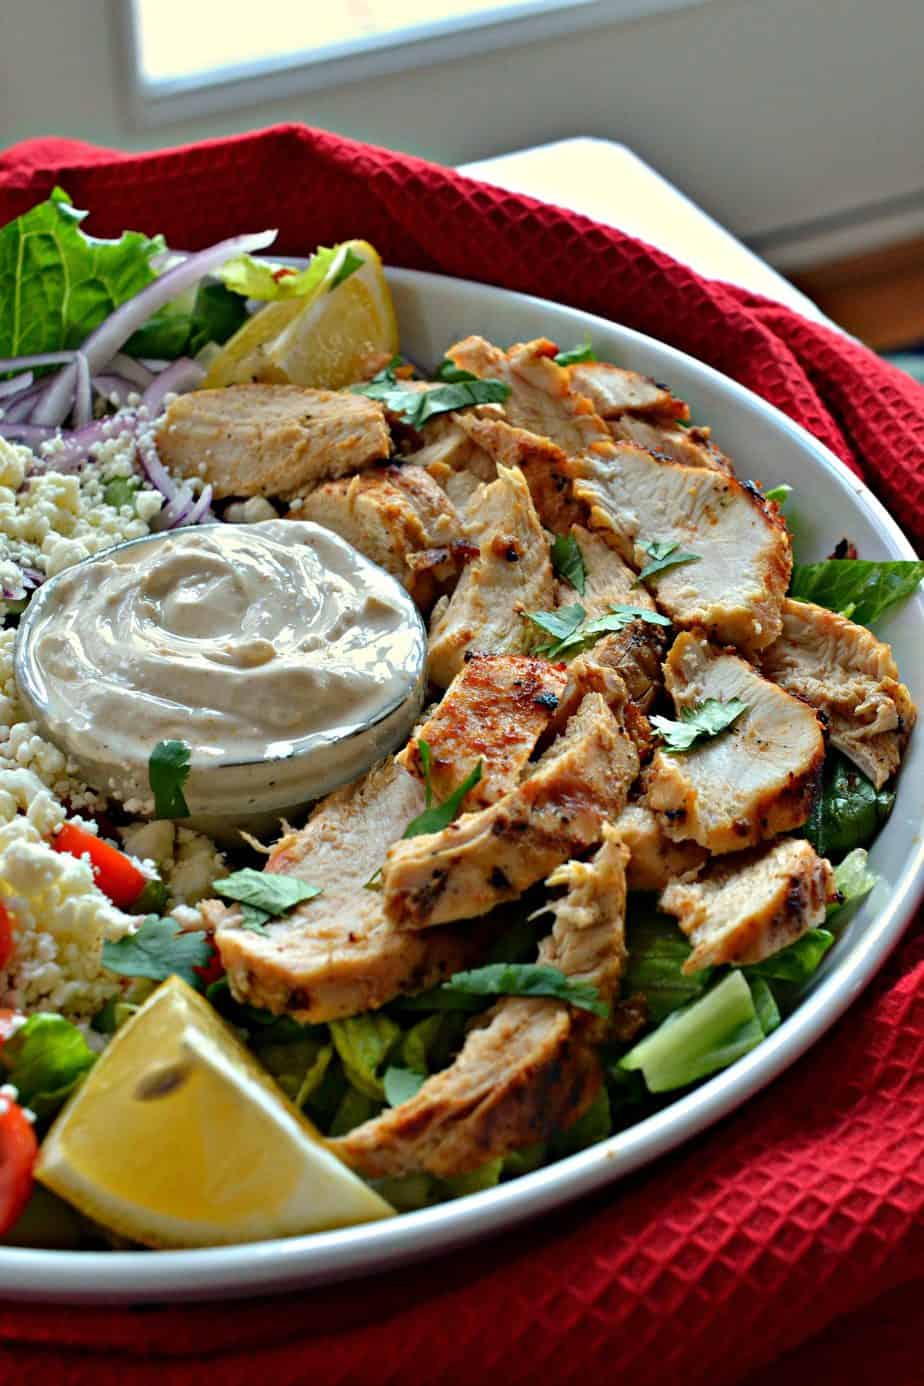 Marinated boneless skinless chicken breasts or thighs are grilled to perfection and served on soft pita bread with fresh yogurt sauce, tomatoes, cucumbers, sweet red onion, and feta cheese.